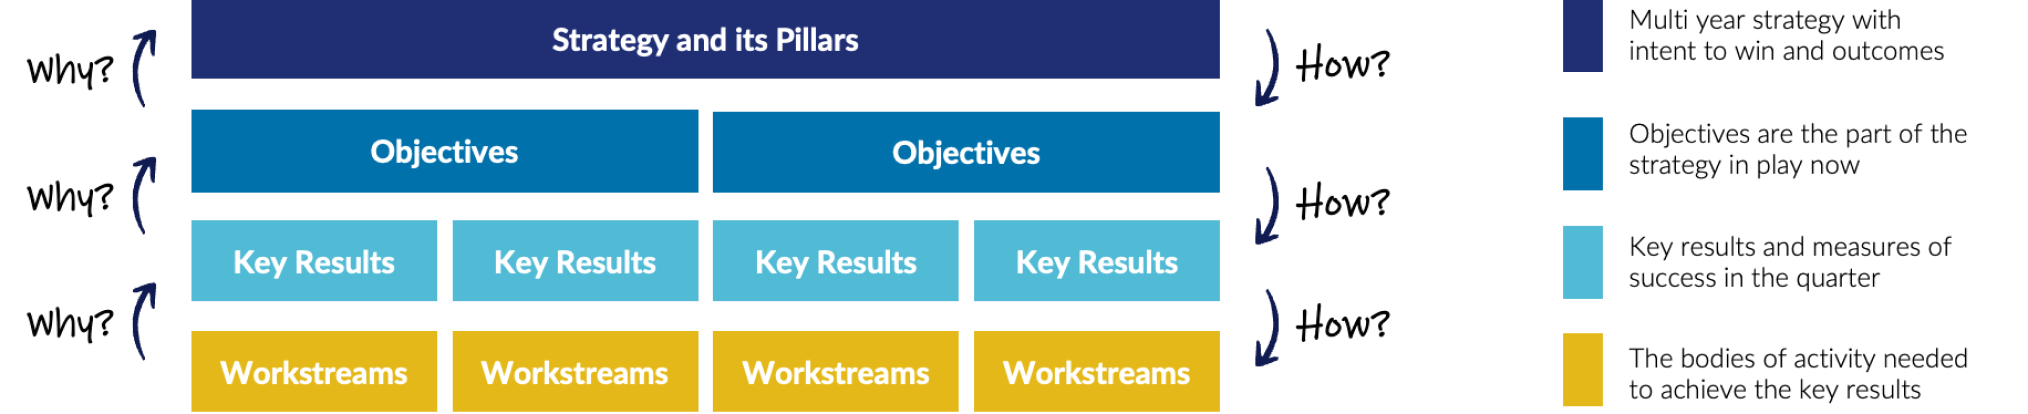 Strategy and its Pillars